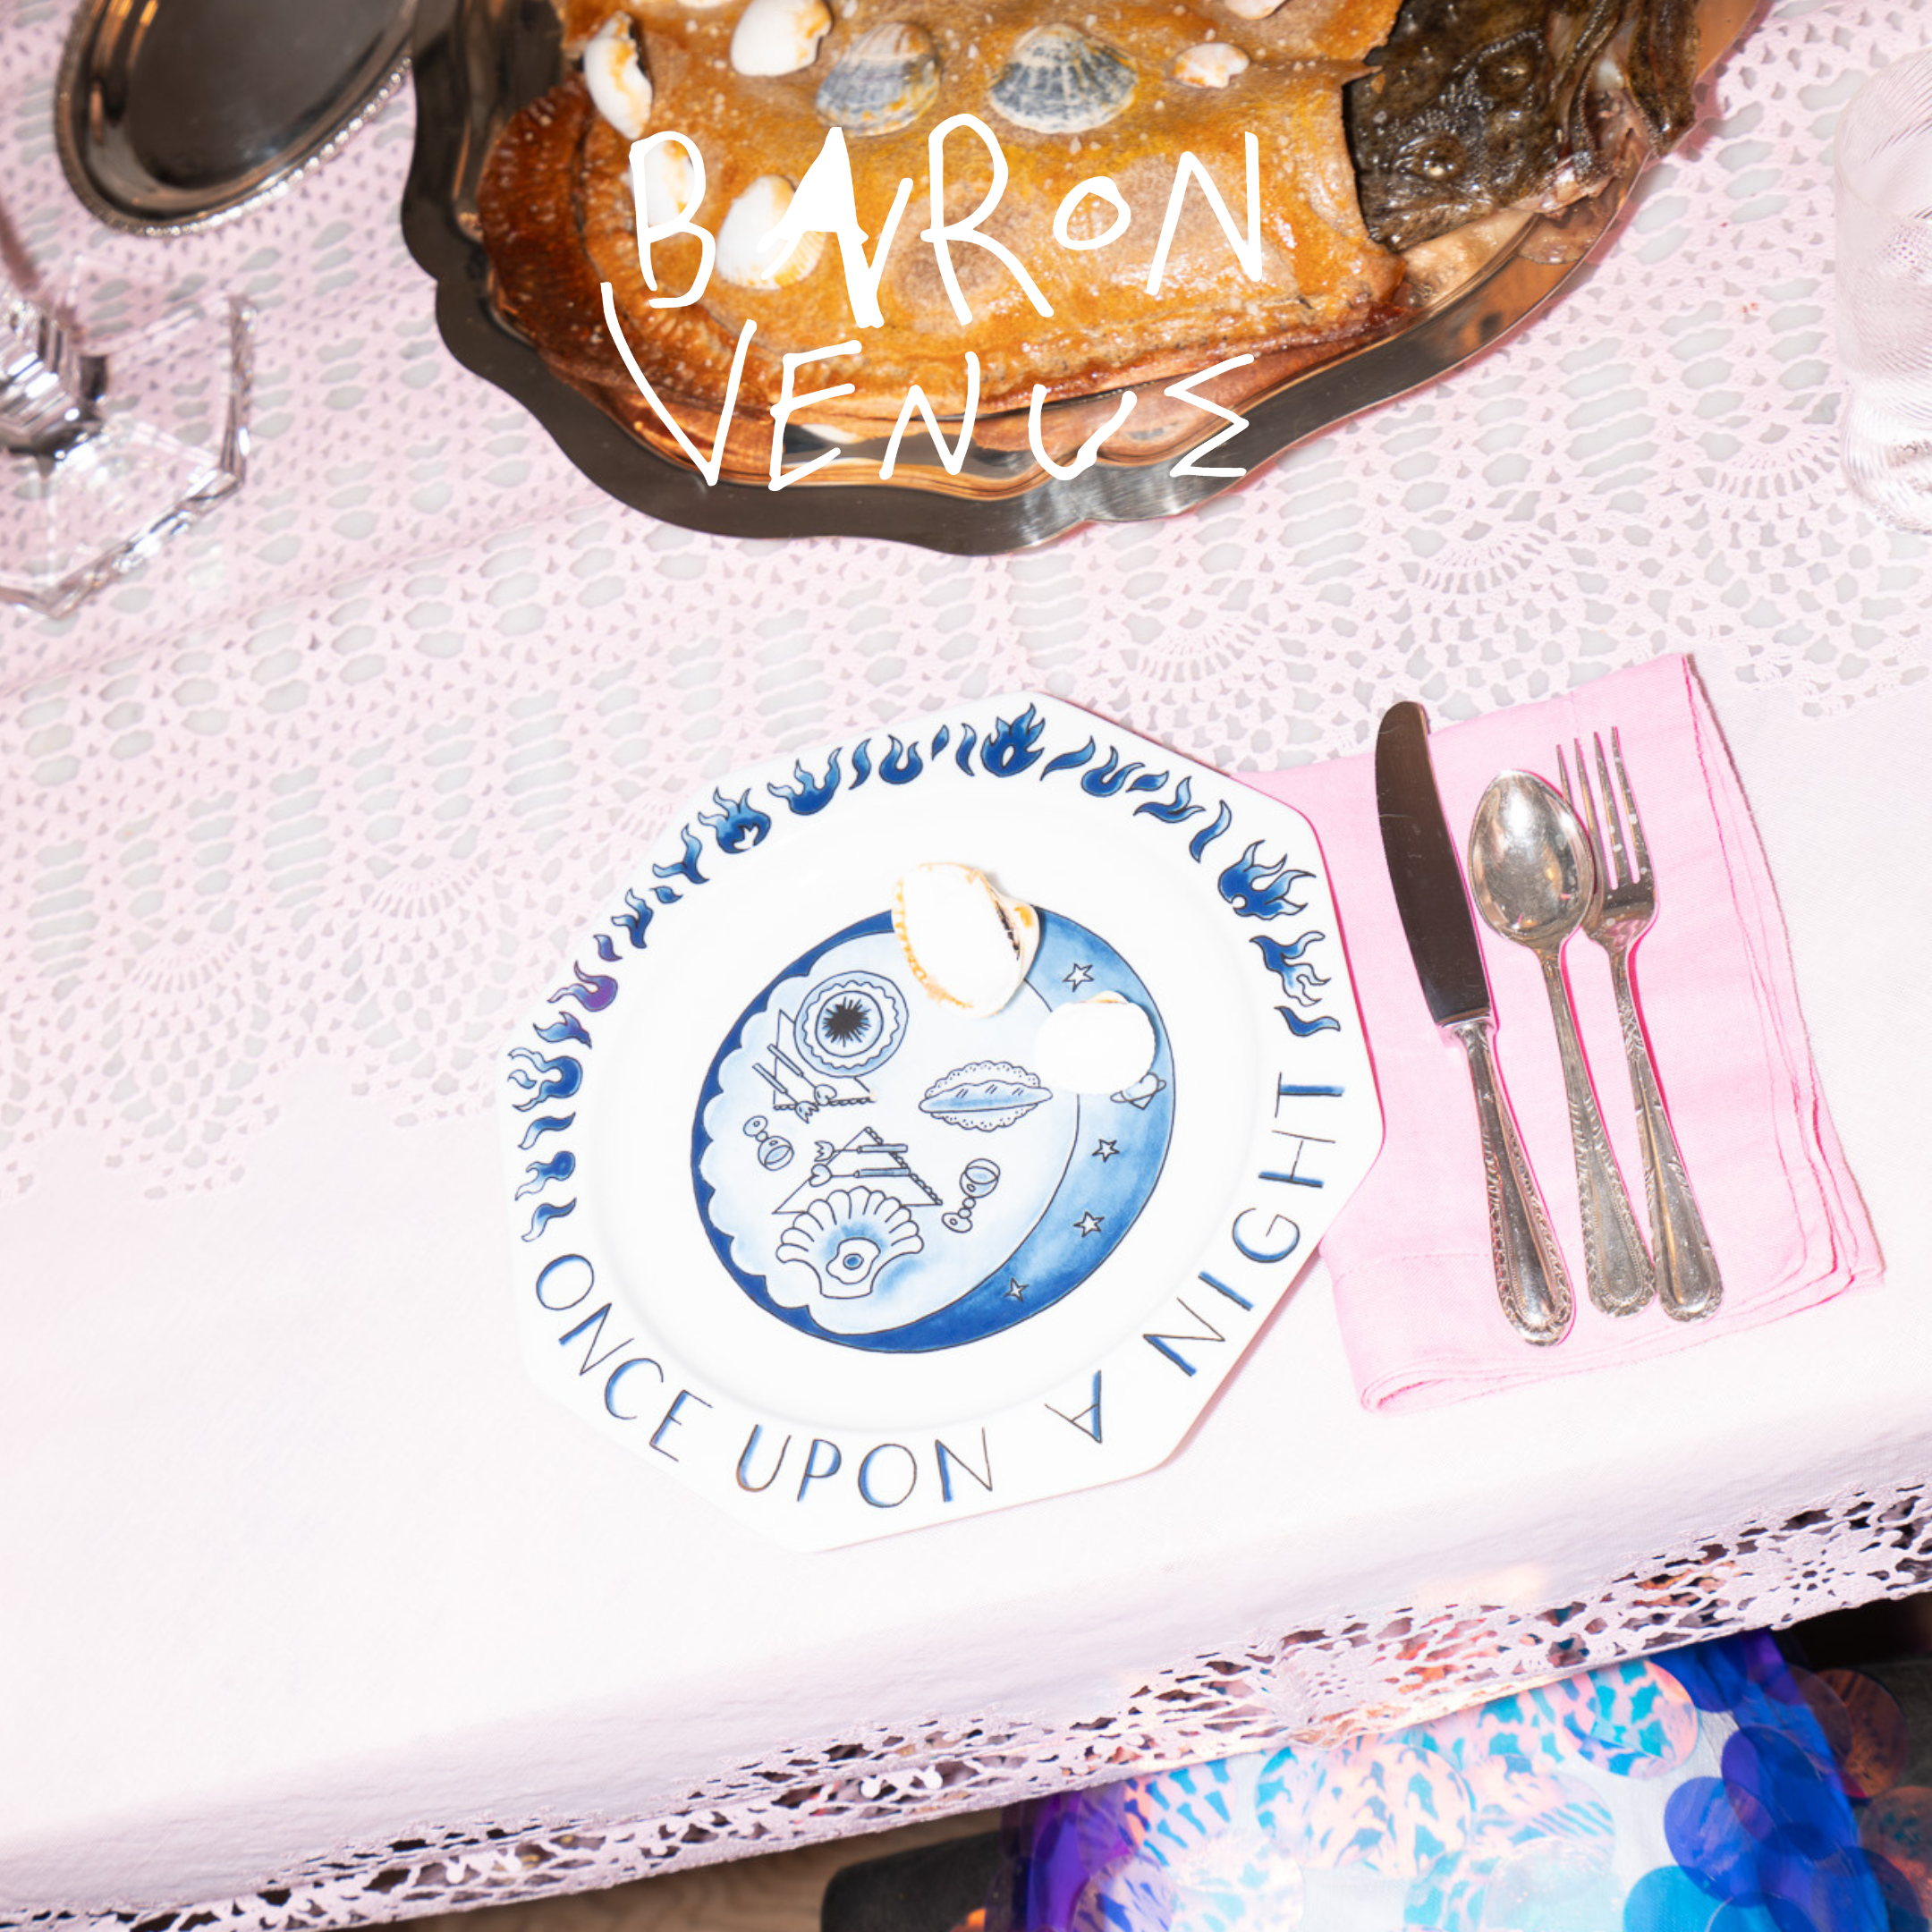 Photo of a table setting with a pink tablecloth a glass, knife and fork. In white, childlike font it says Baron Venus at the top